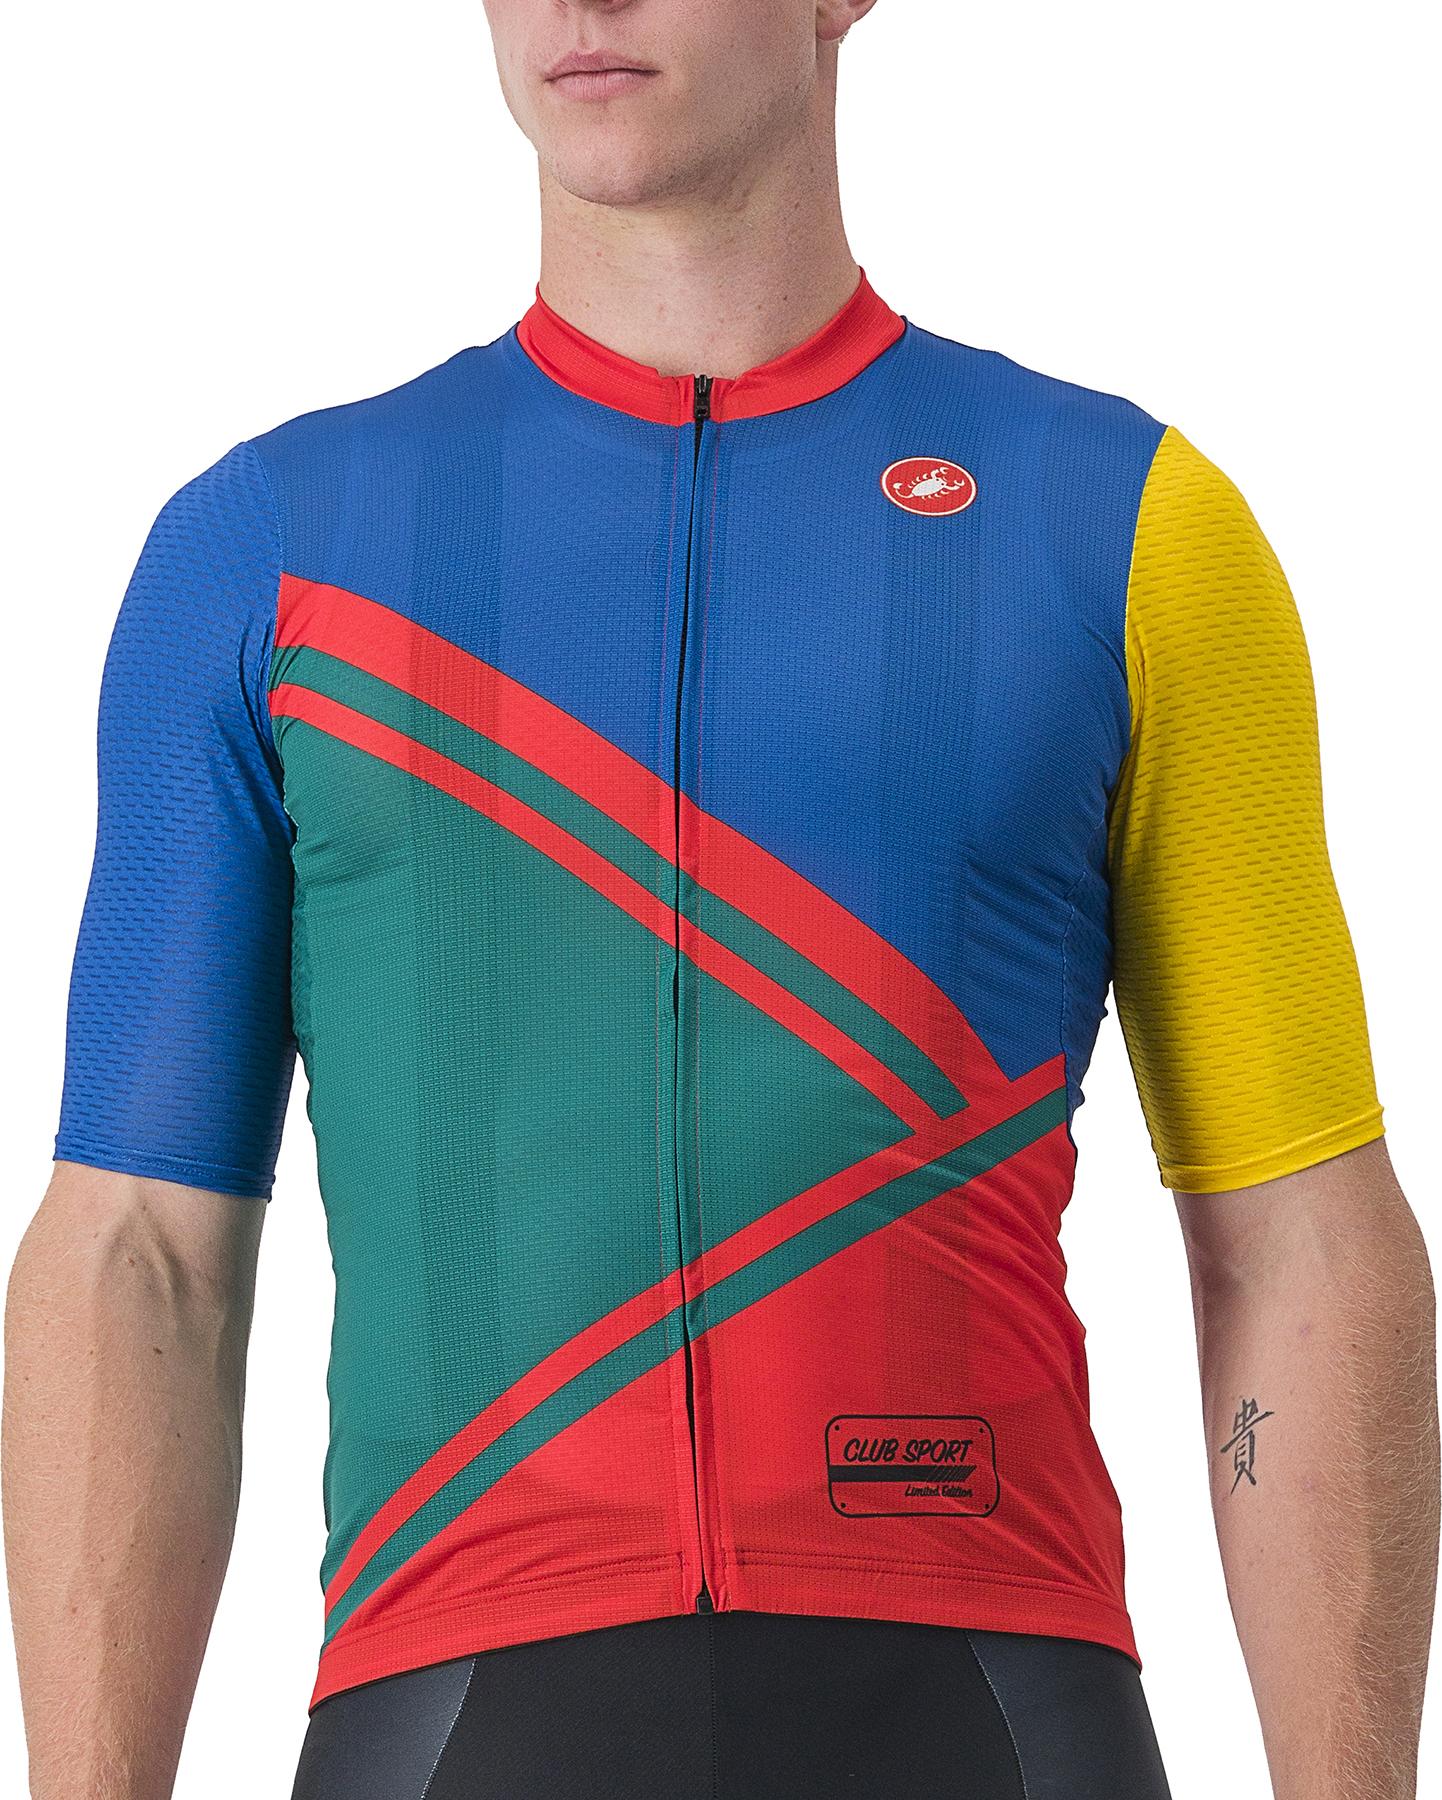 Castelli Club Sport Racing Competizione Jersey - Green/red/blue/yellow